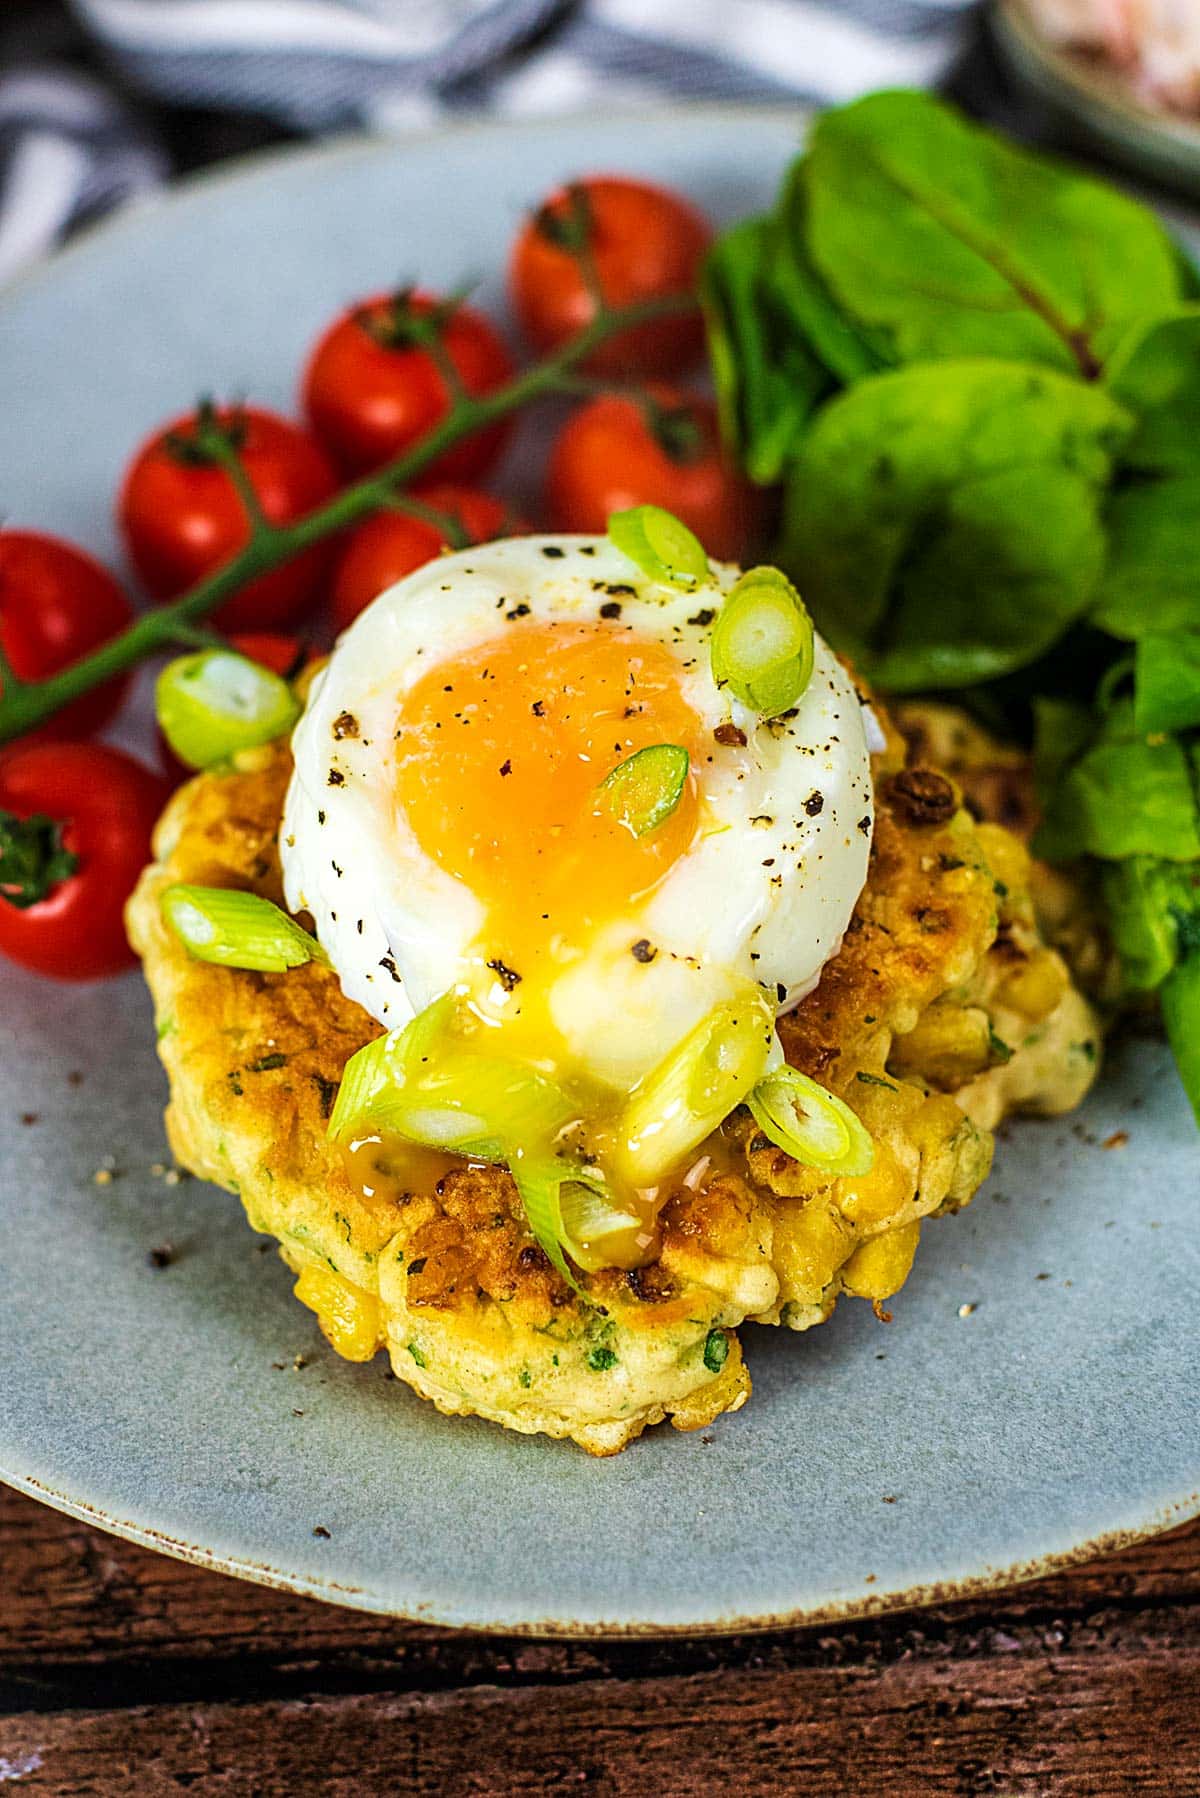 A sweetcorn fritter topped with a poached egg.